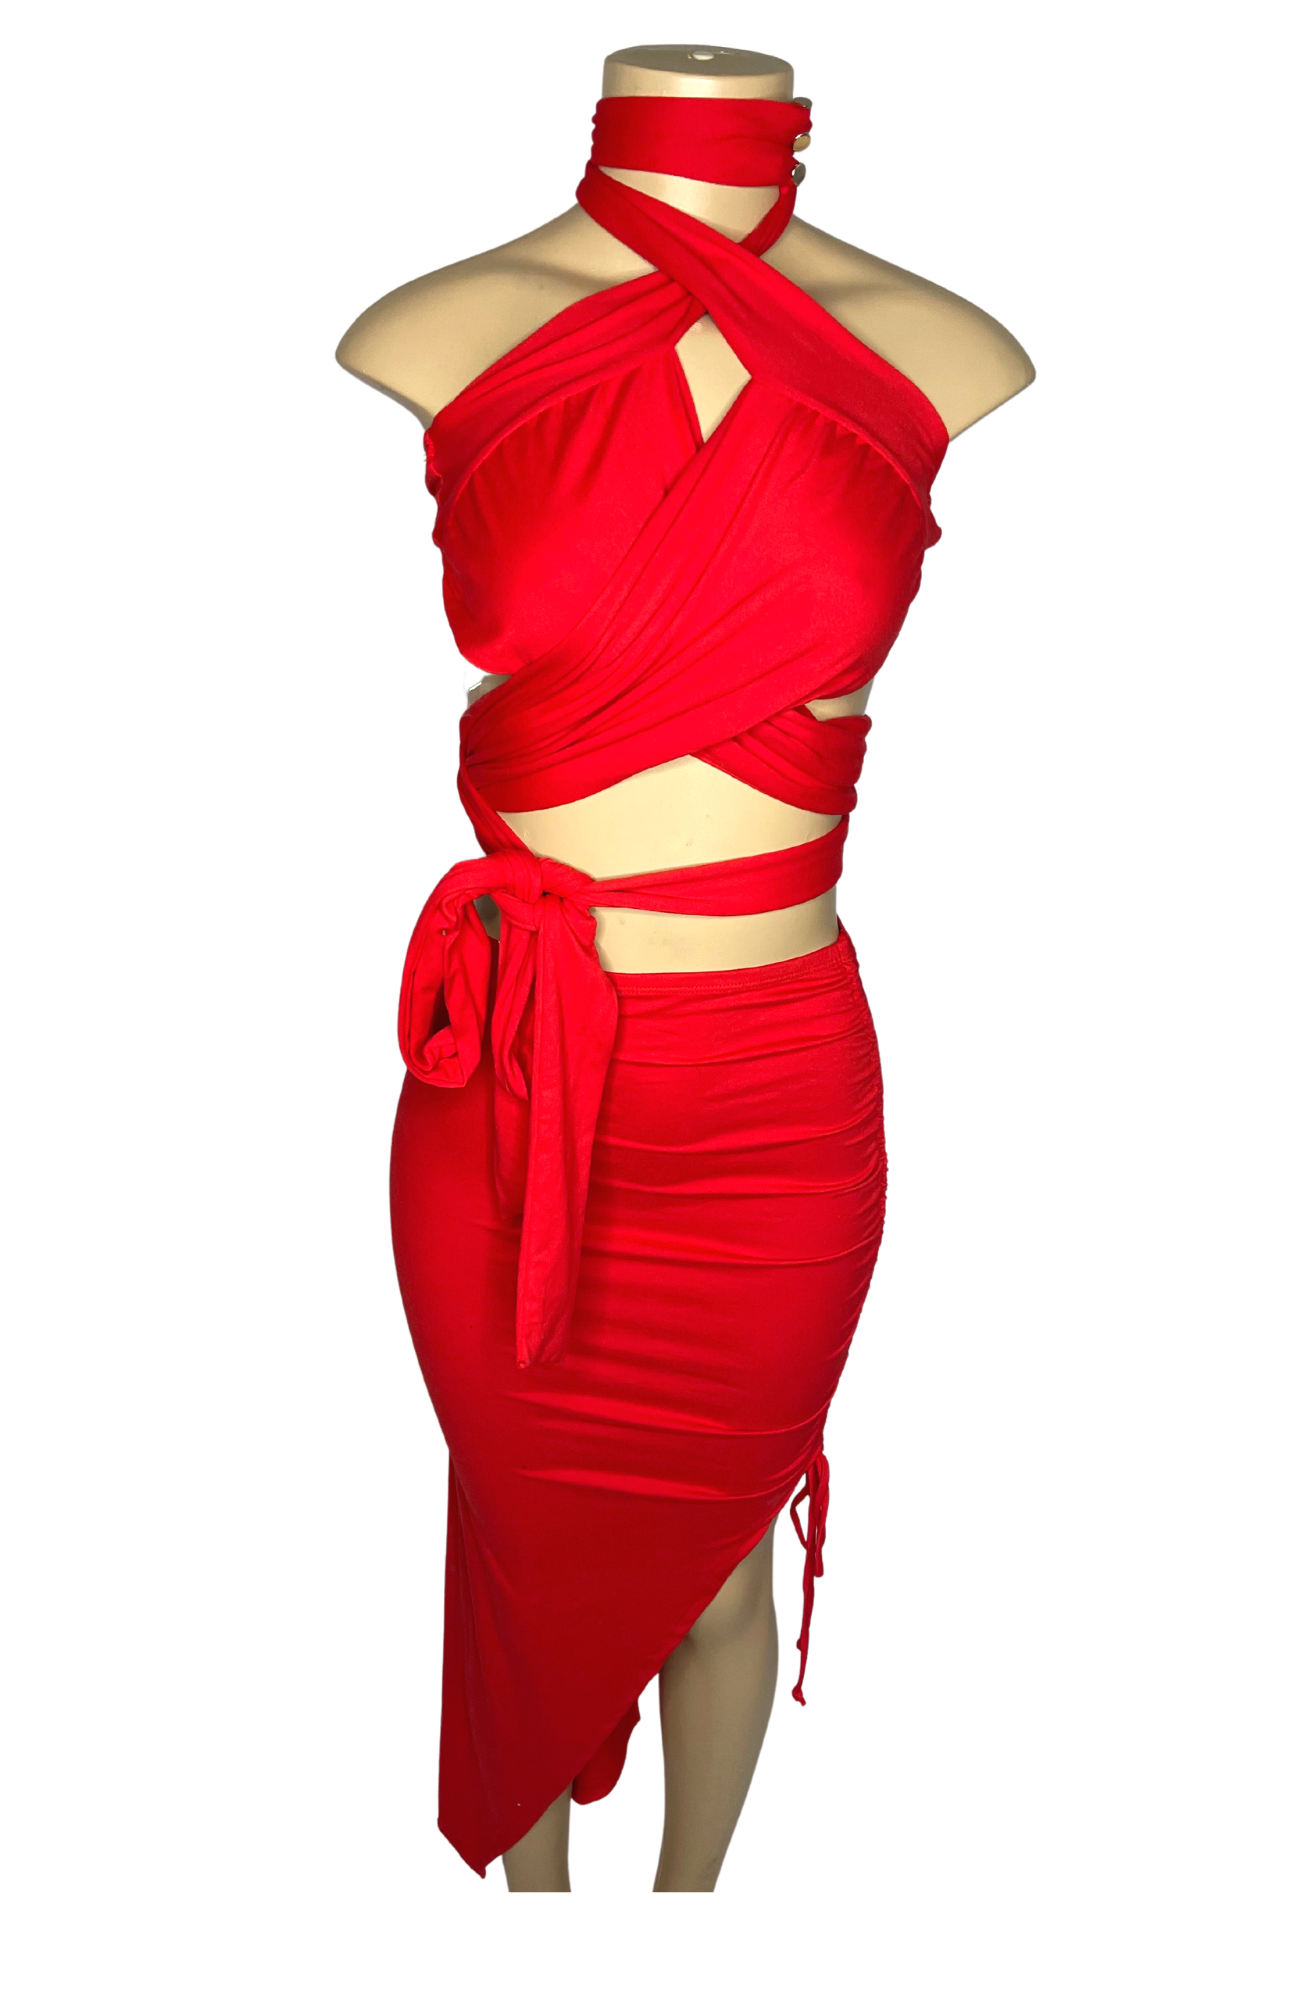 red, red oufit,stretchy oufit,skirt set,crop top,wrap around top,maxi skirt,matching,set,sets,red sets,yup she bad, yup she bad sets,valentines outfit, valentines day outfit,